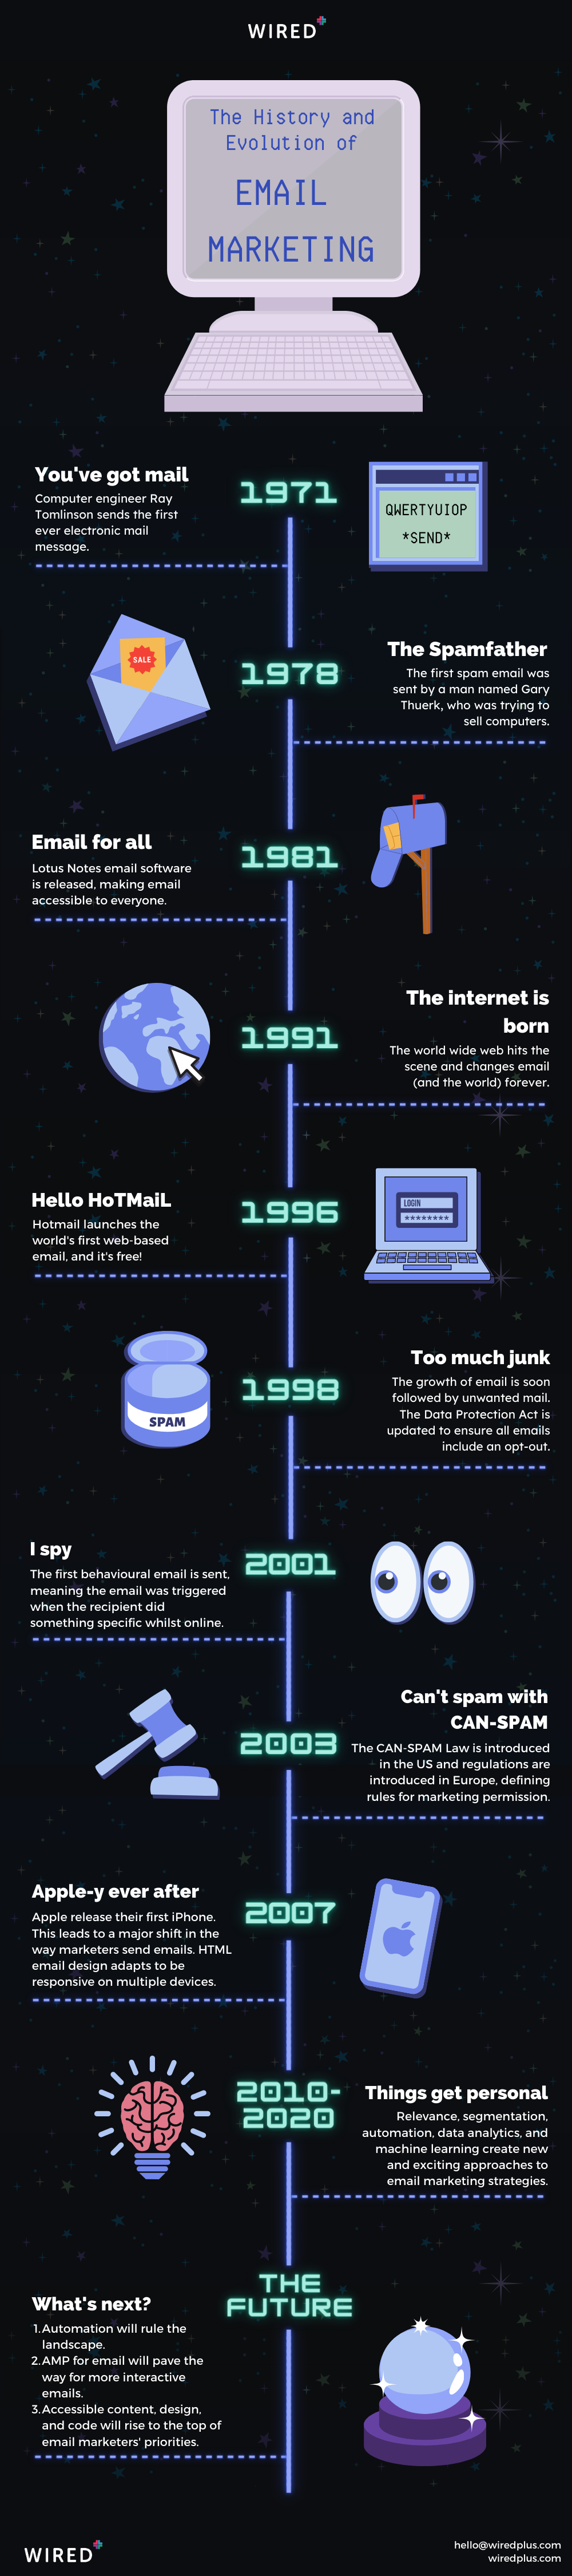 The History and Evolution of Email Marketing timeline infographic